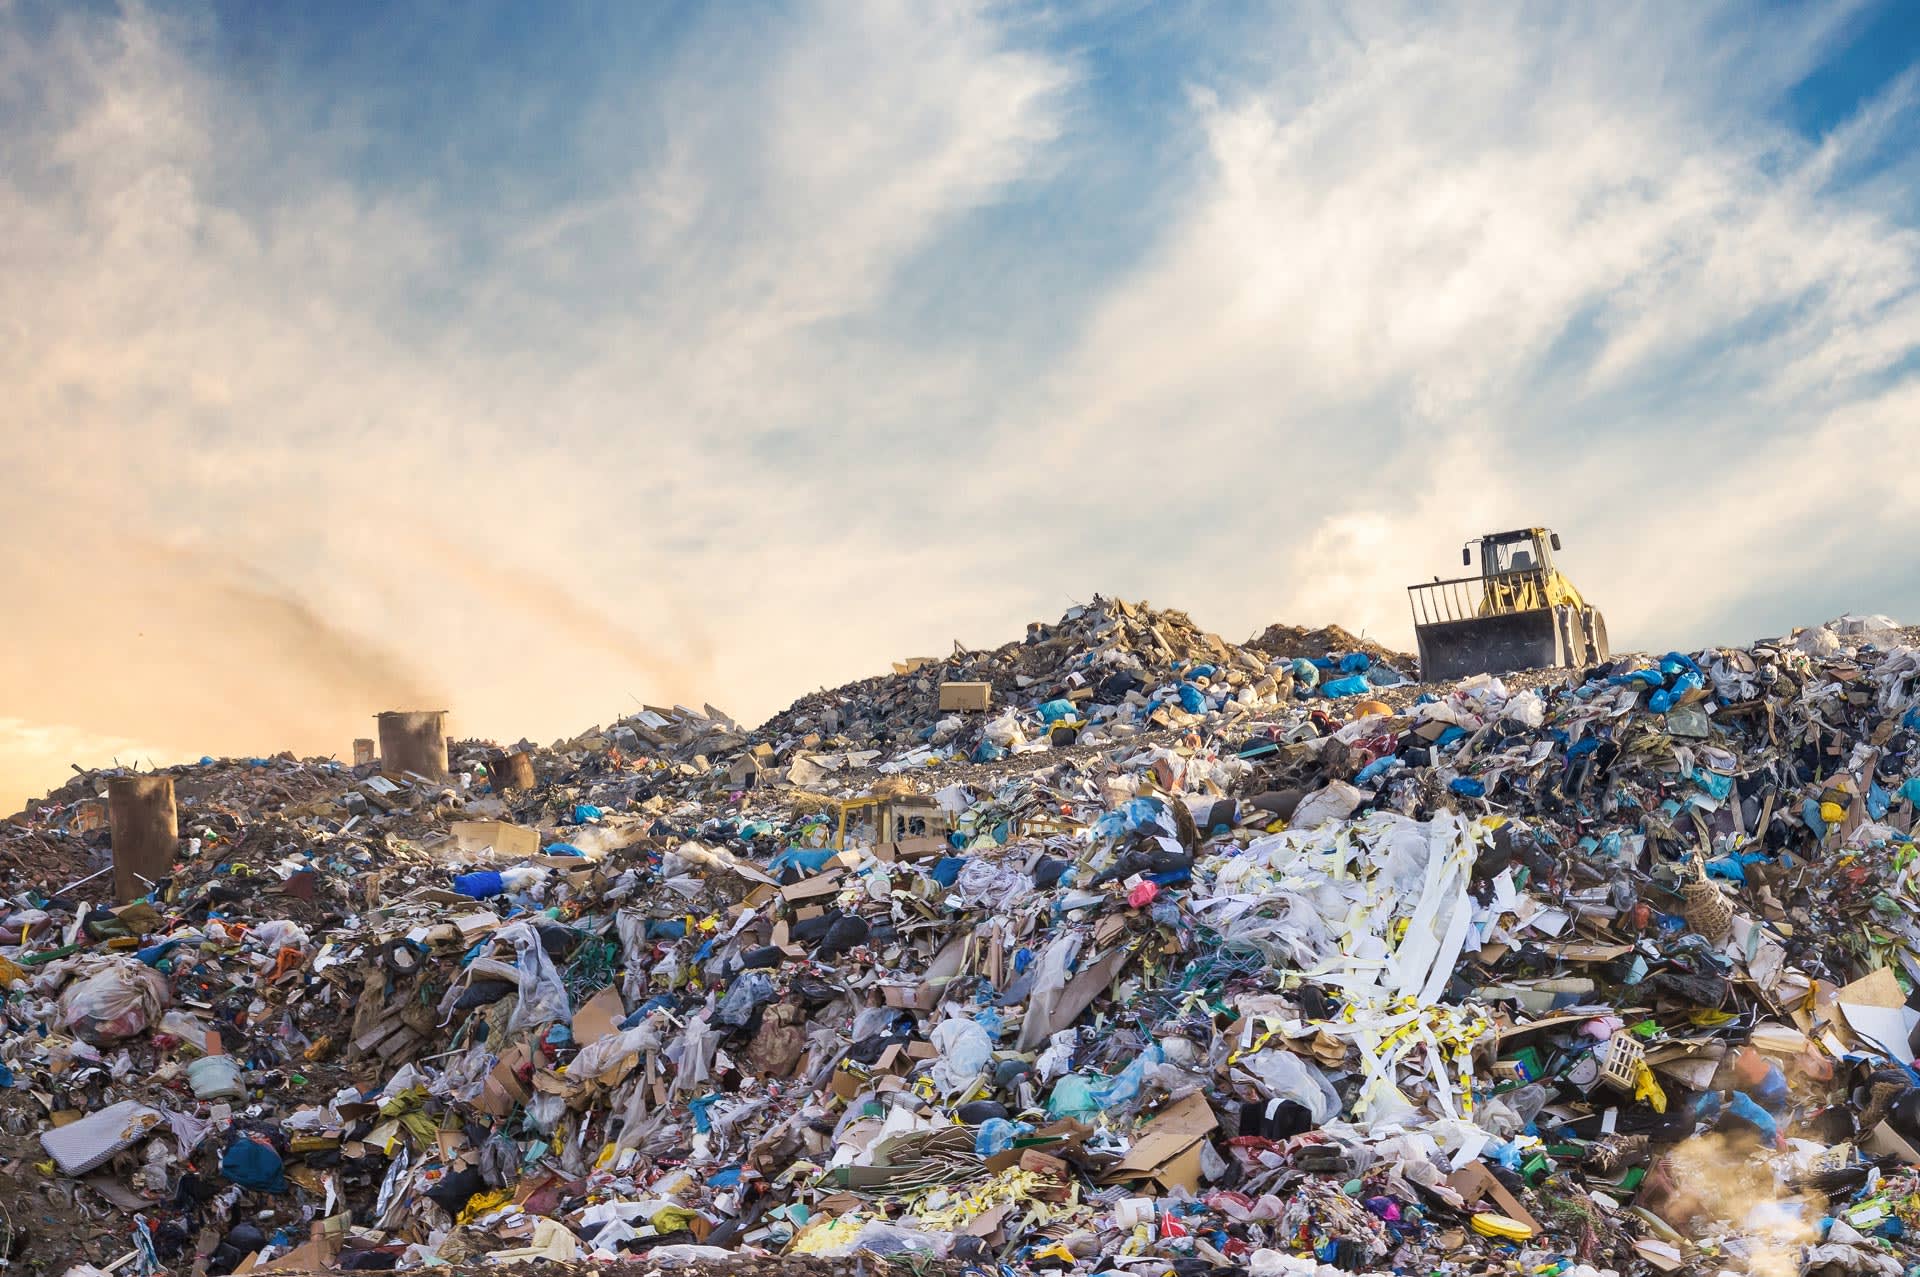 photo of a bulldozer on top of a giant pile of garbage in a landfill